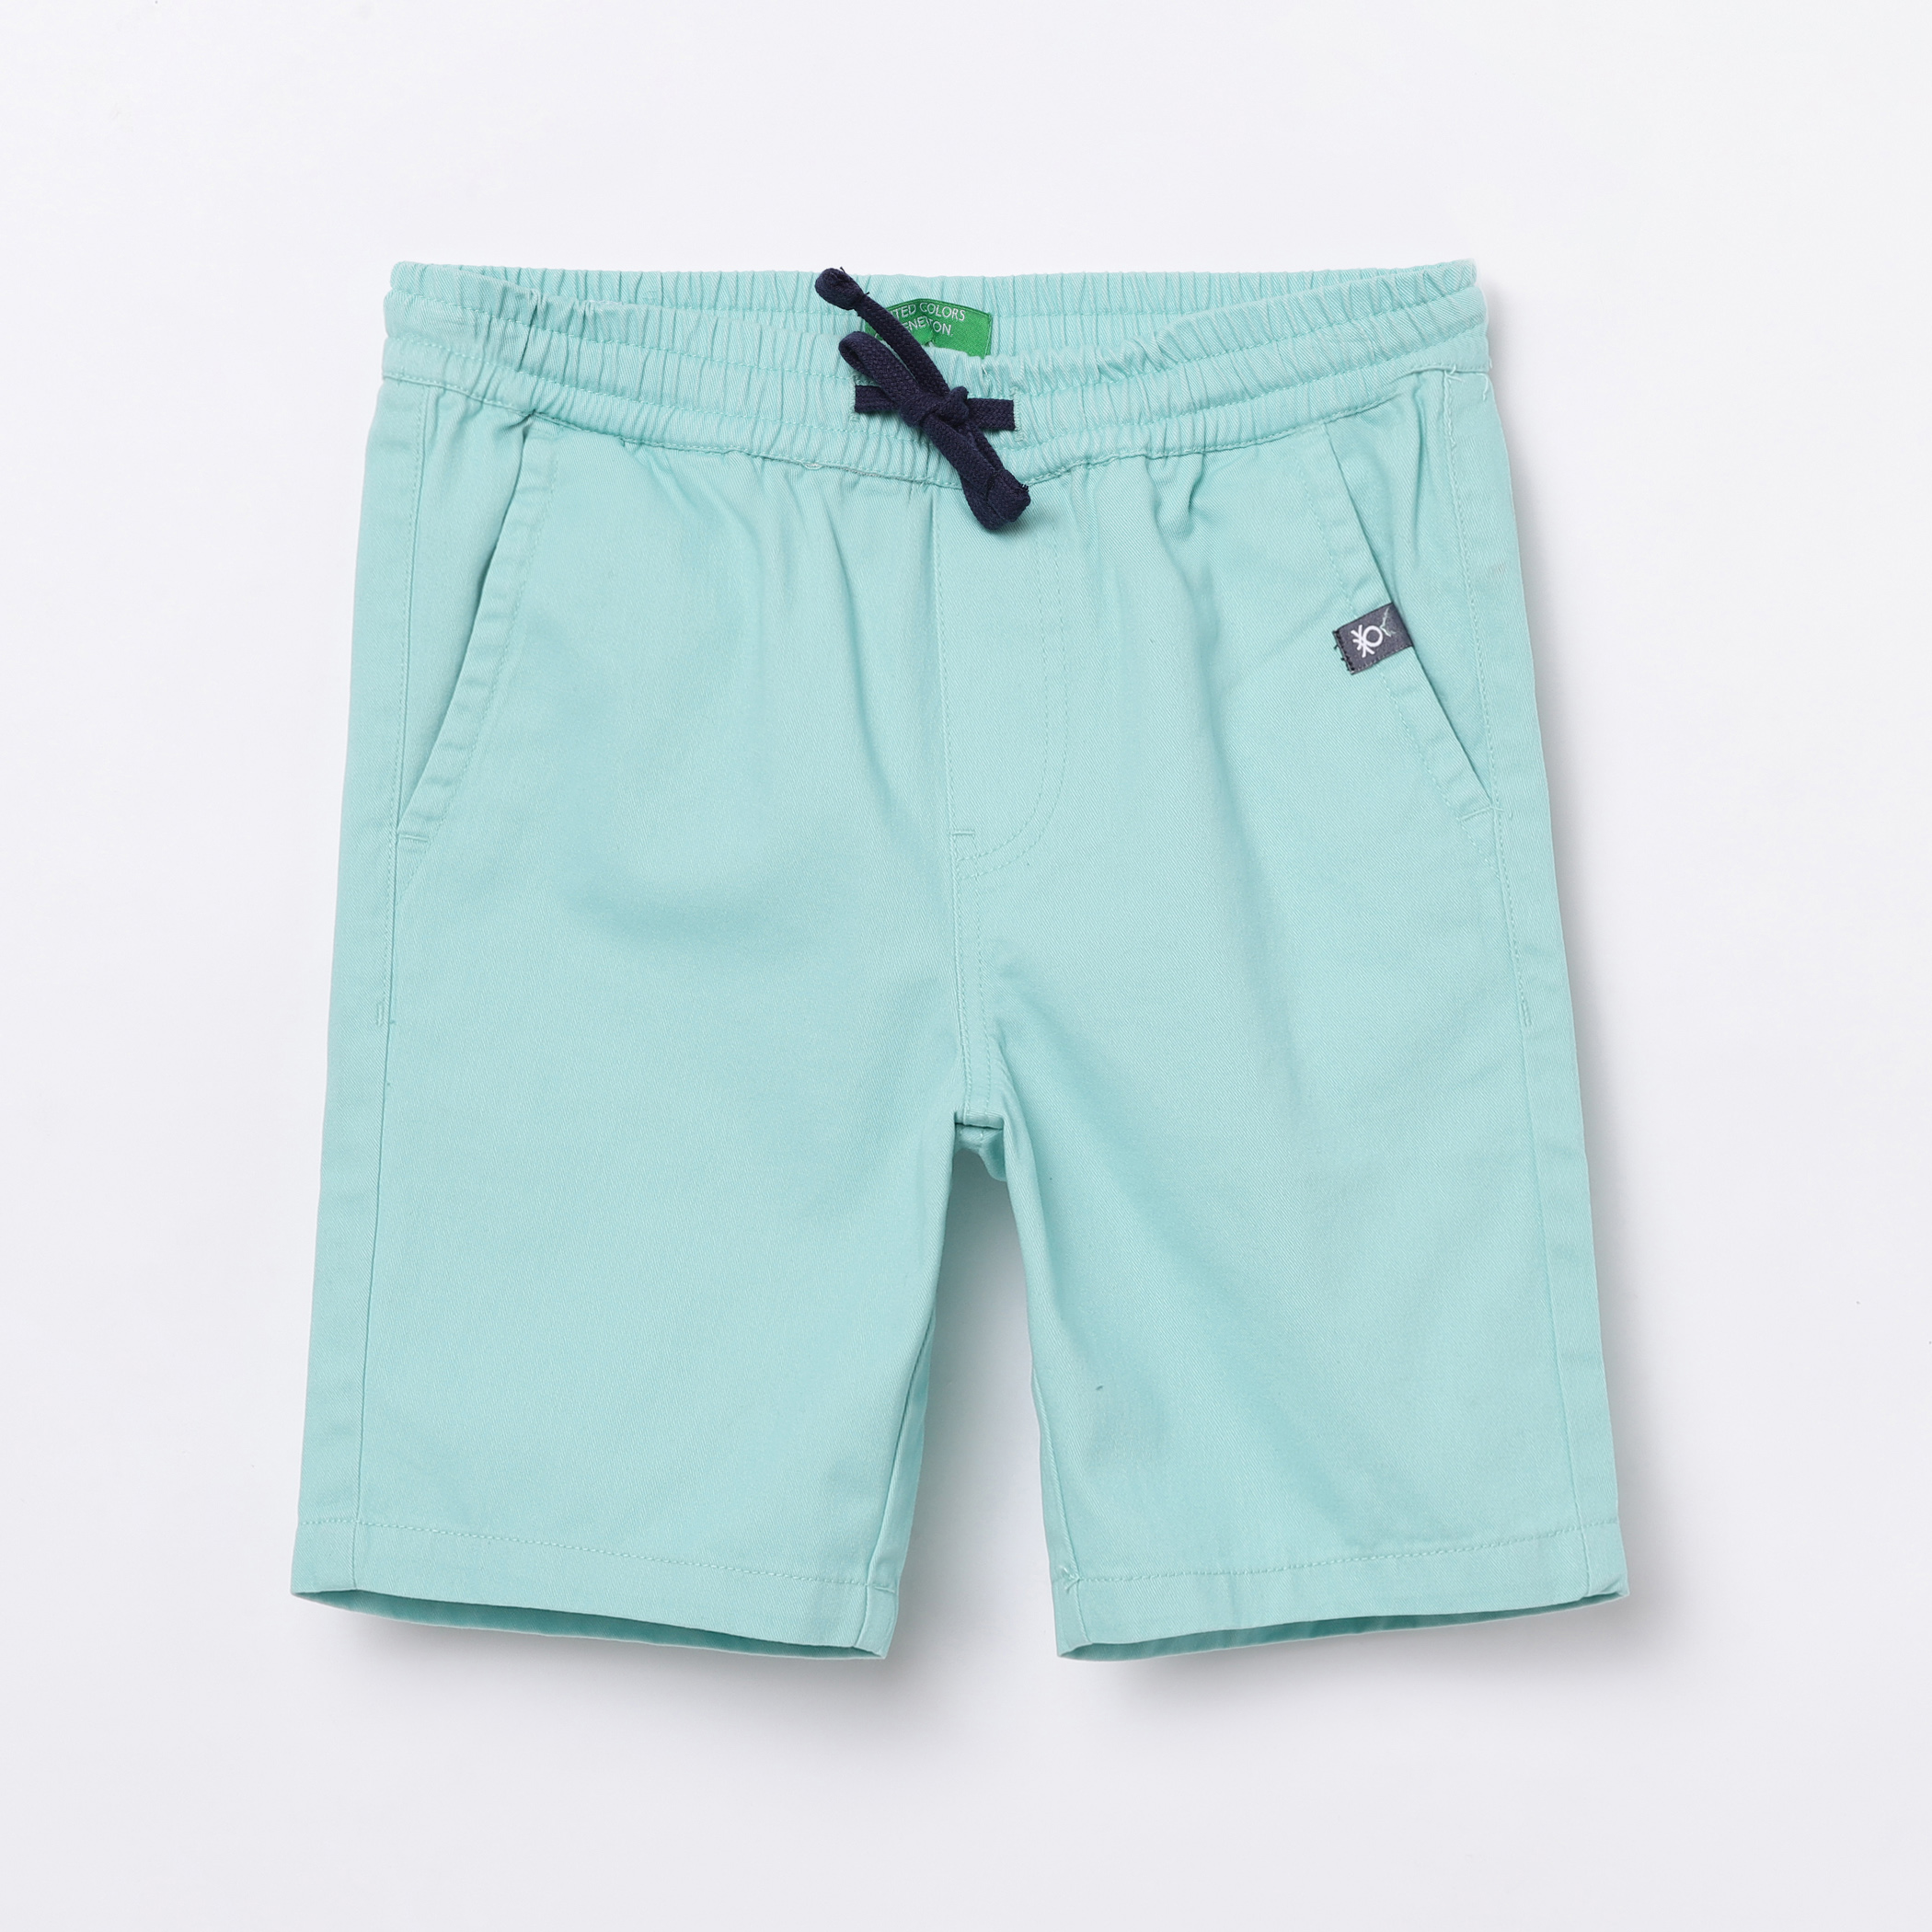 UNITED COLORS OF BENETTON Boys Solid Drawstring Waist Shorts